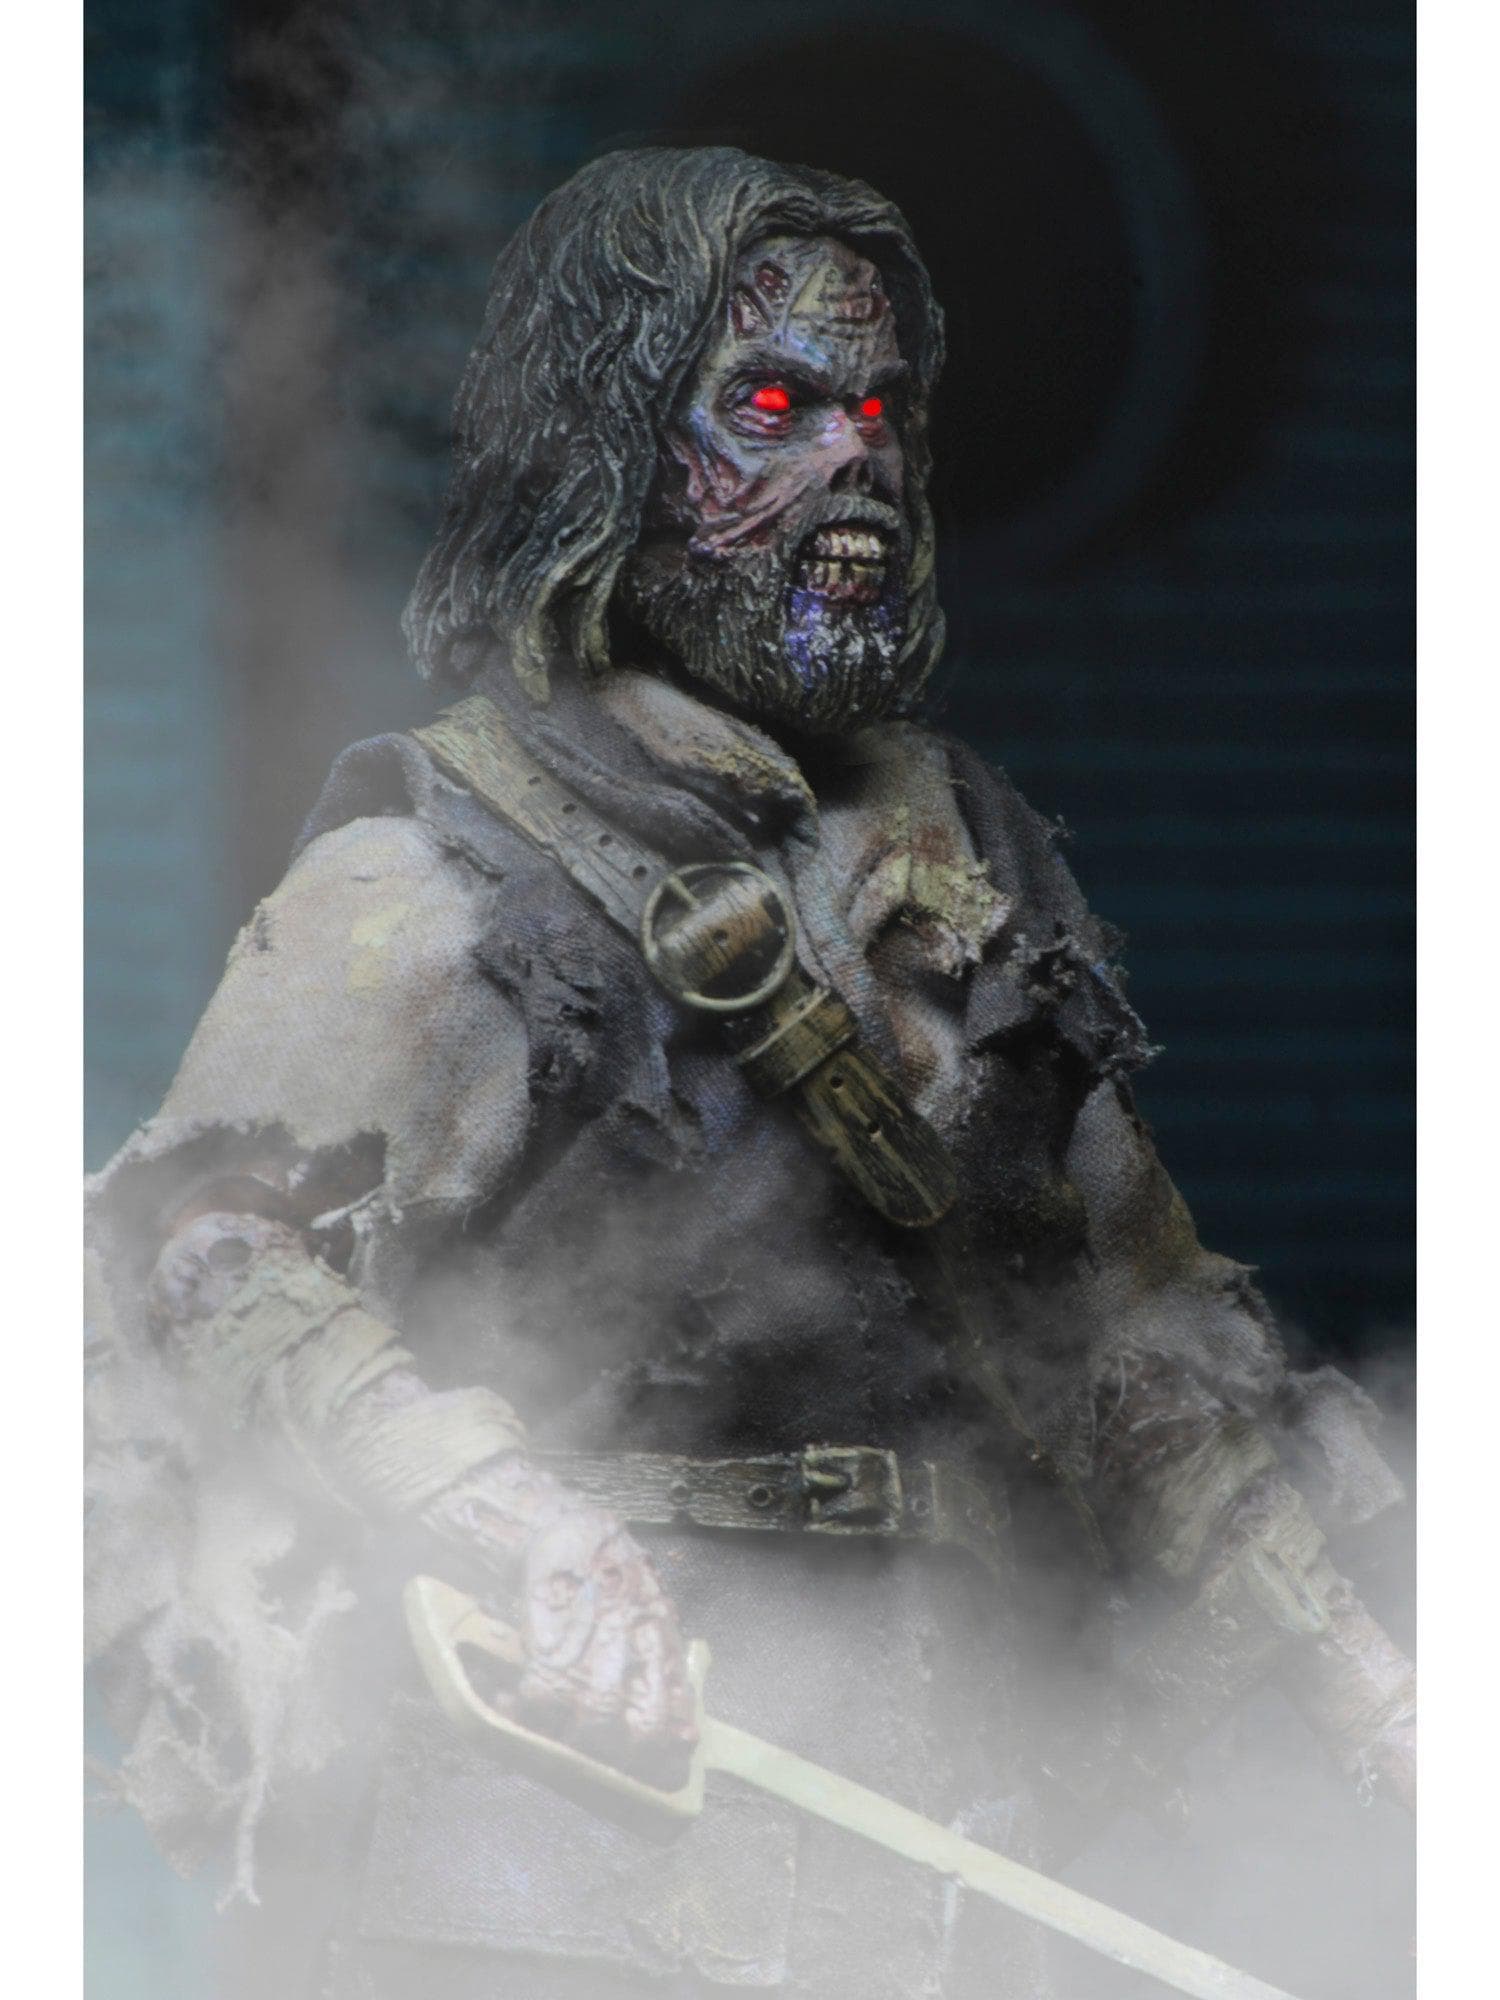 NECA - The Fog - 8" Clothed Action Figure - Captain Blake - costumes.com